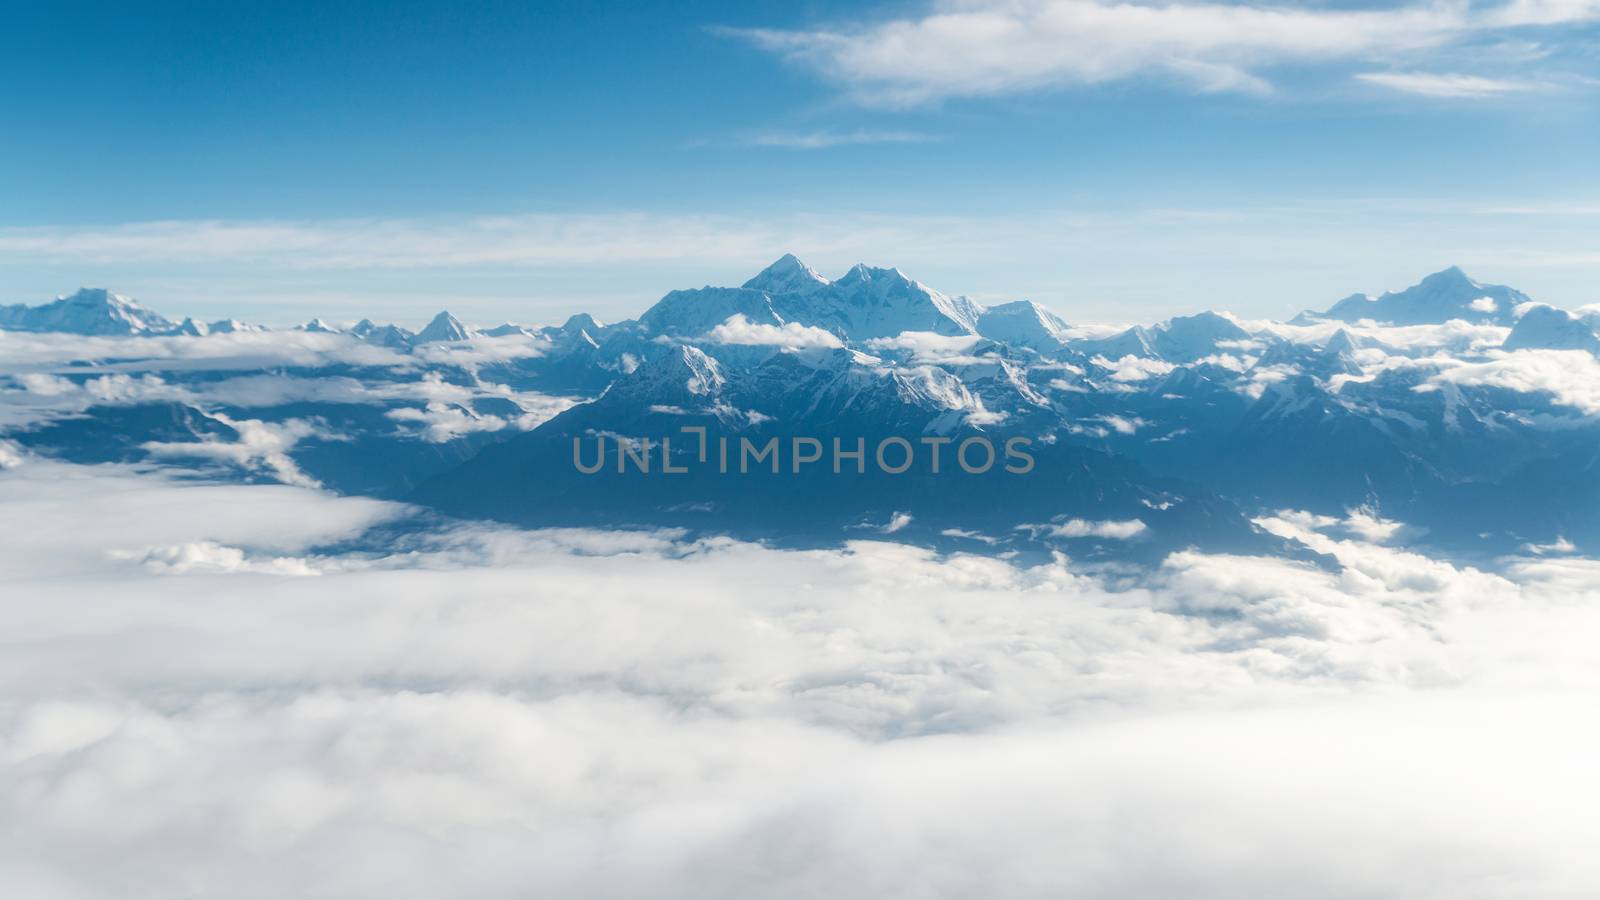 Mount Everest aerial view in Nepal by dutourdumonde